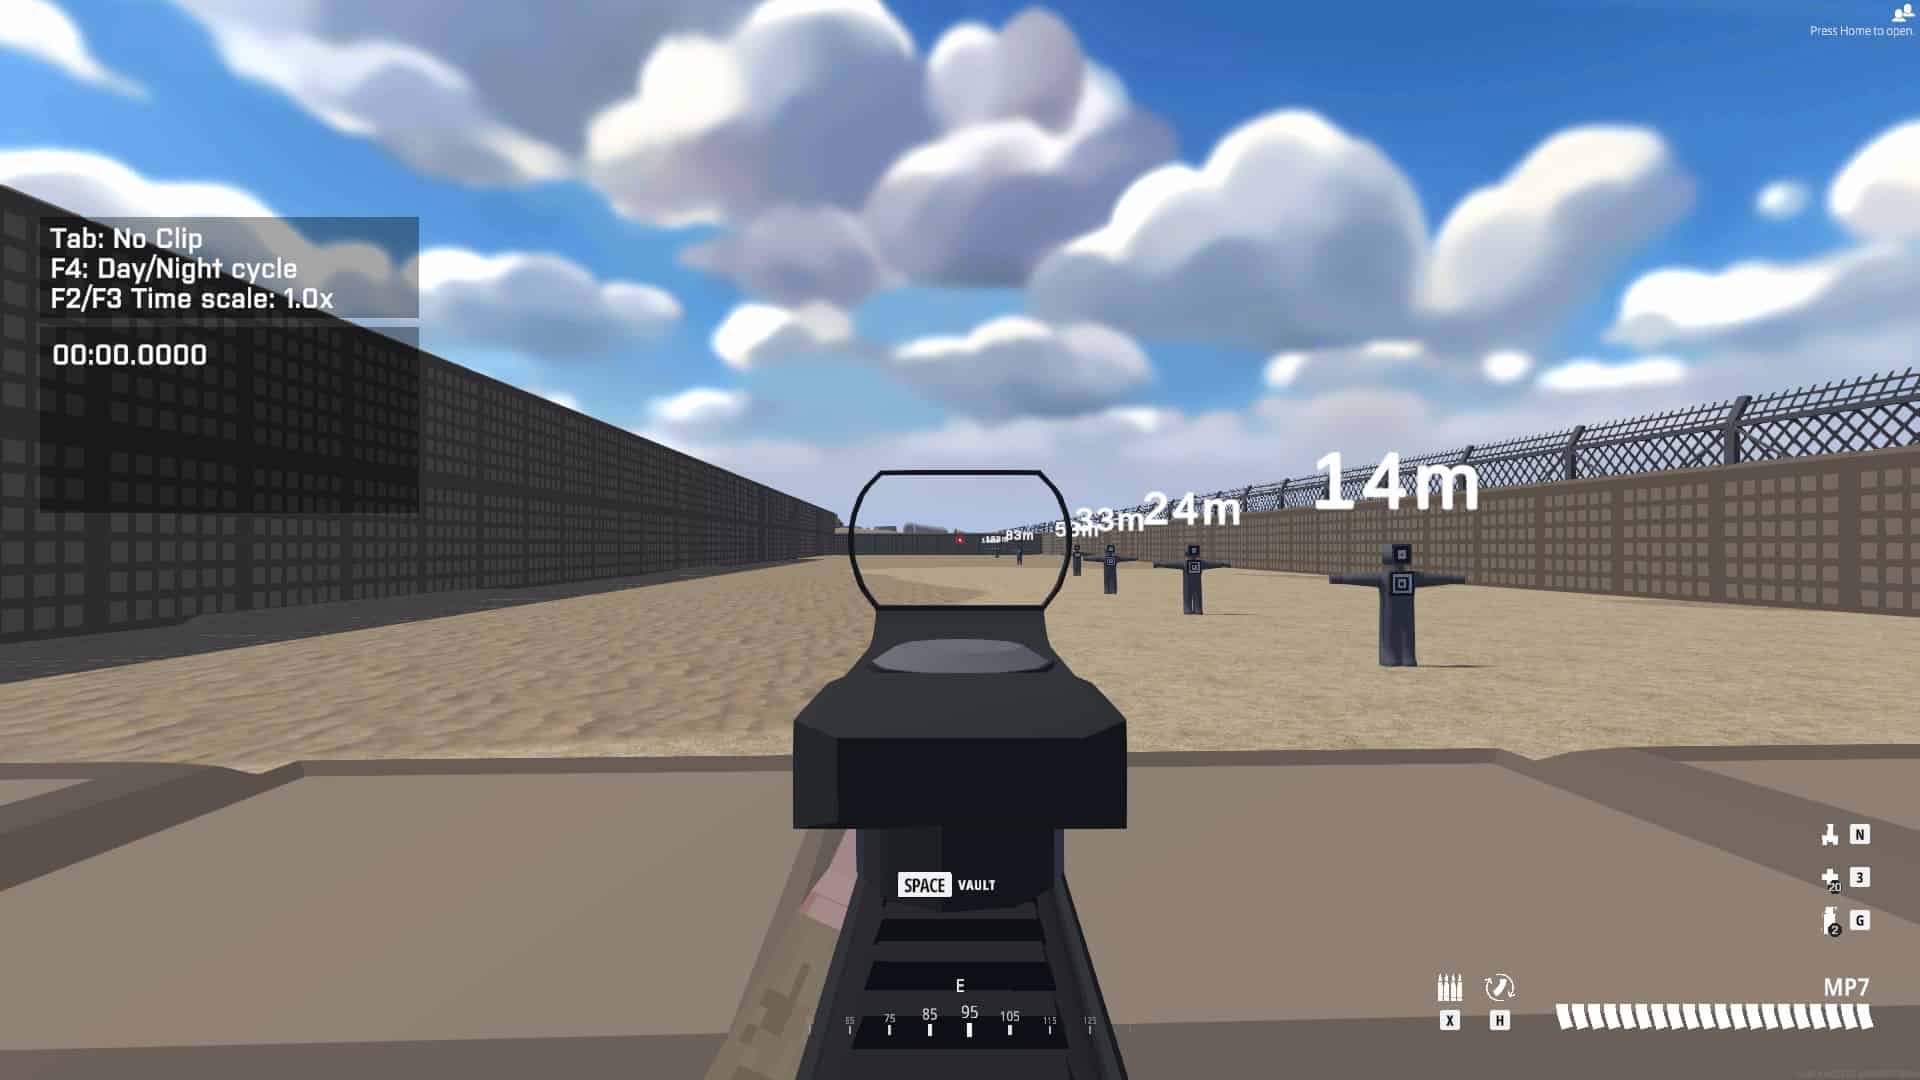 BattleBit Remastered best weapons: An image of the MP7 weapon used in a training range in BattleBit Remastered.